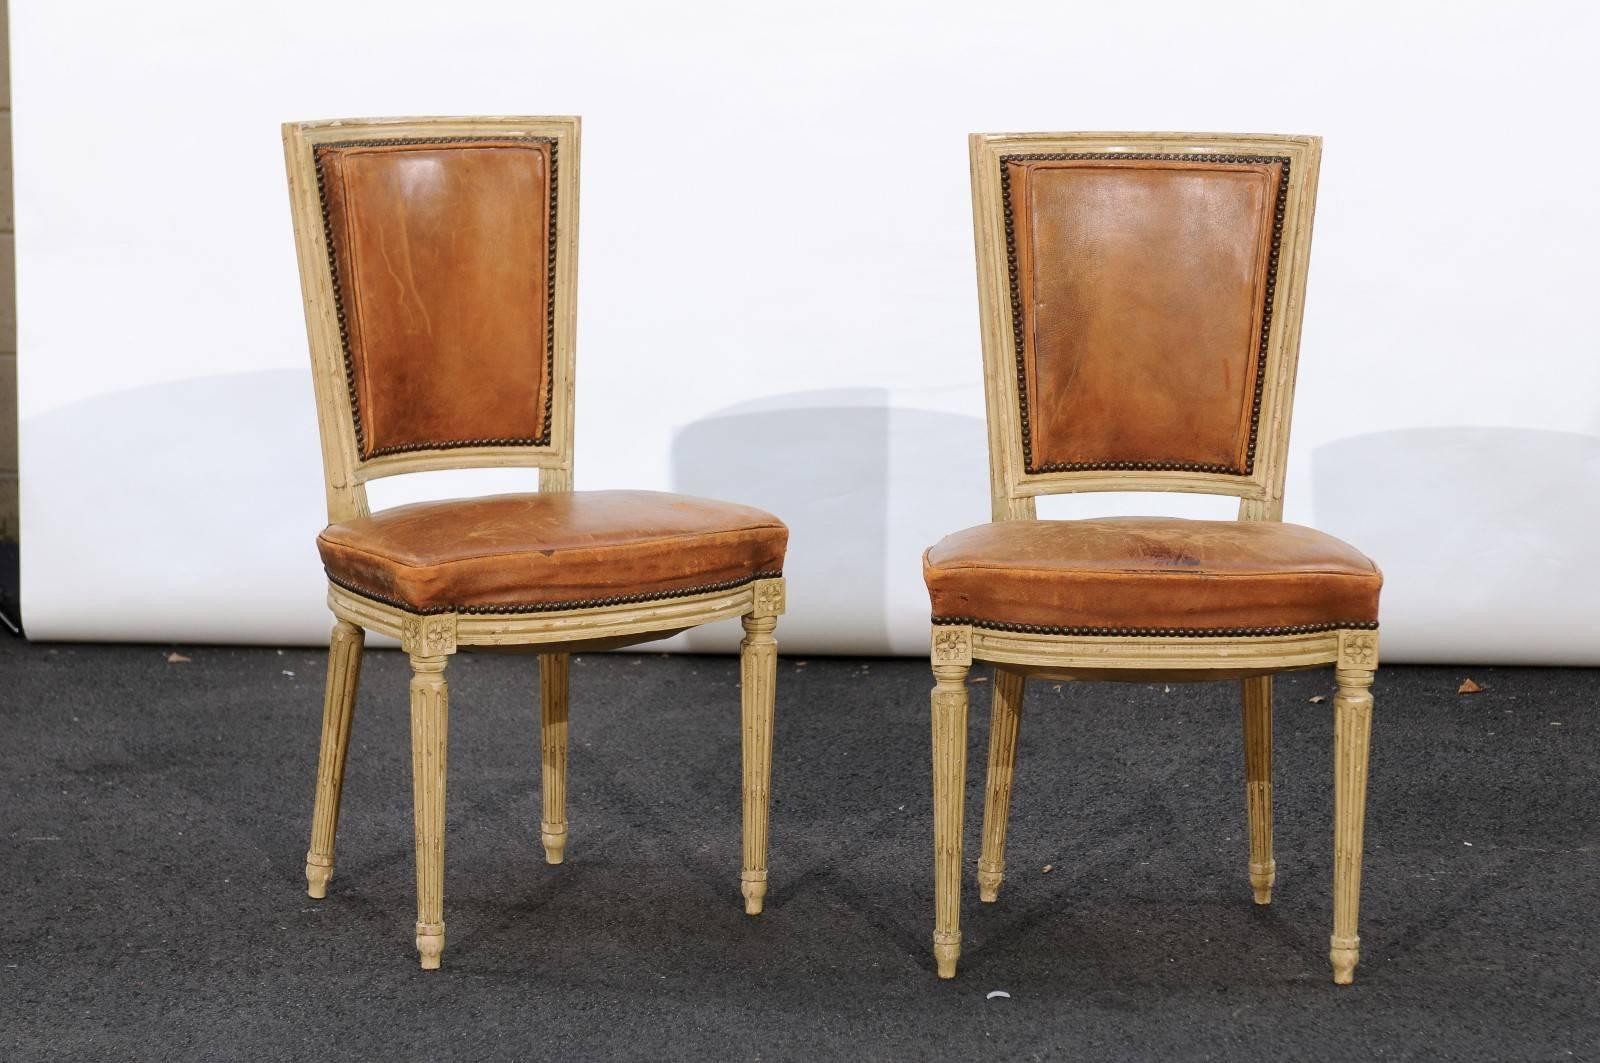 This set of four French Louis XVI style dining chairs from the mid-20th century features the typical neoclassical décor inspired by antiquity so dear to the Louis XVI era, framing delightful leather seats and backs. We're not sure if it was the